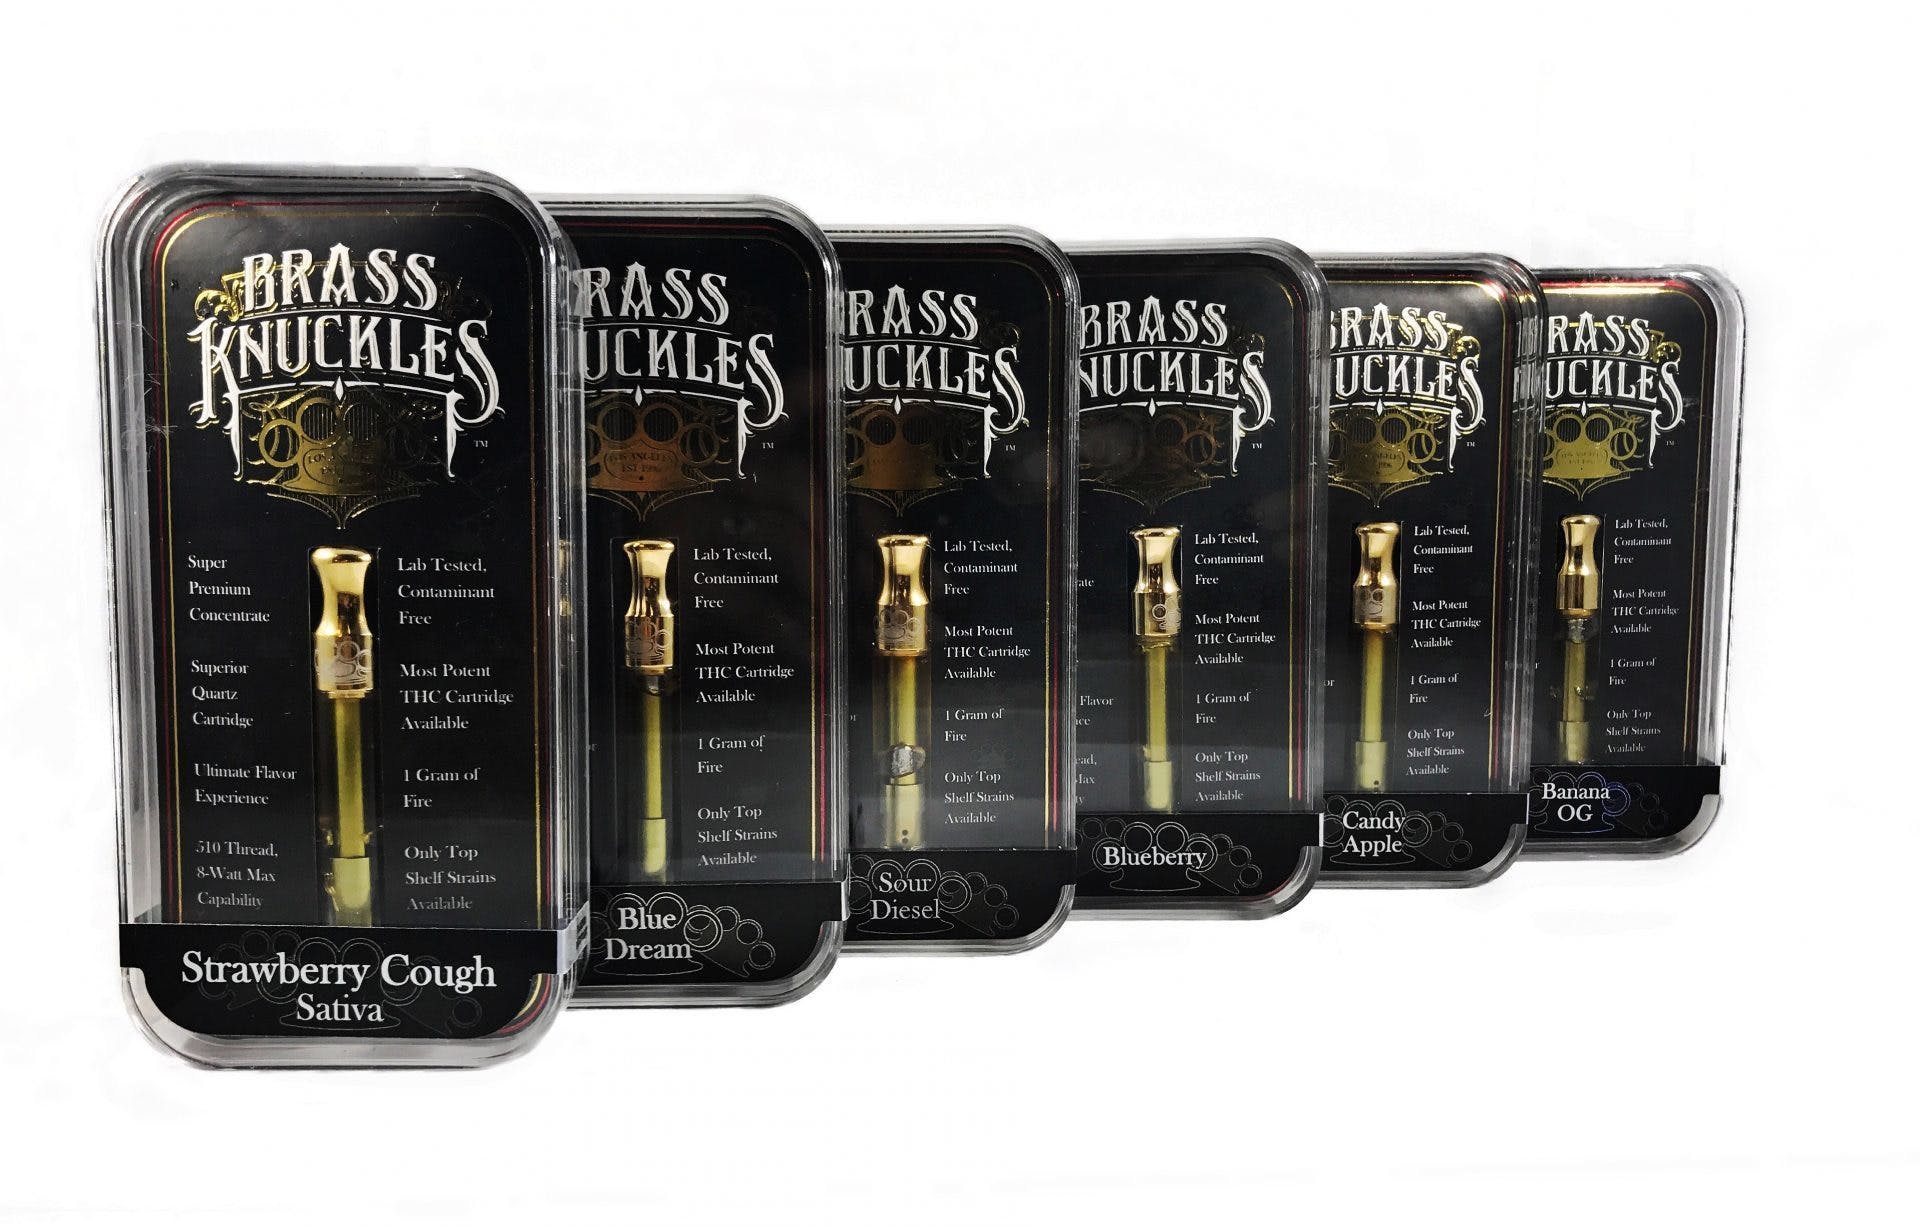 concentrate-brass-knuckles-napalm-og-3-for-90-21-mix-and-match